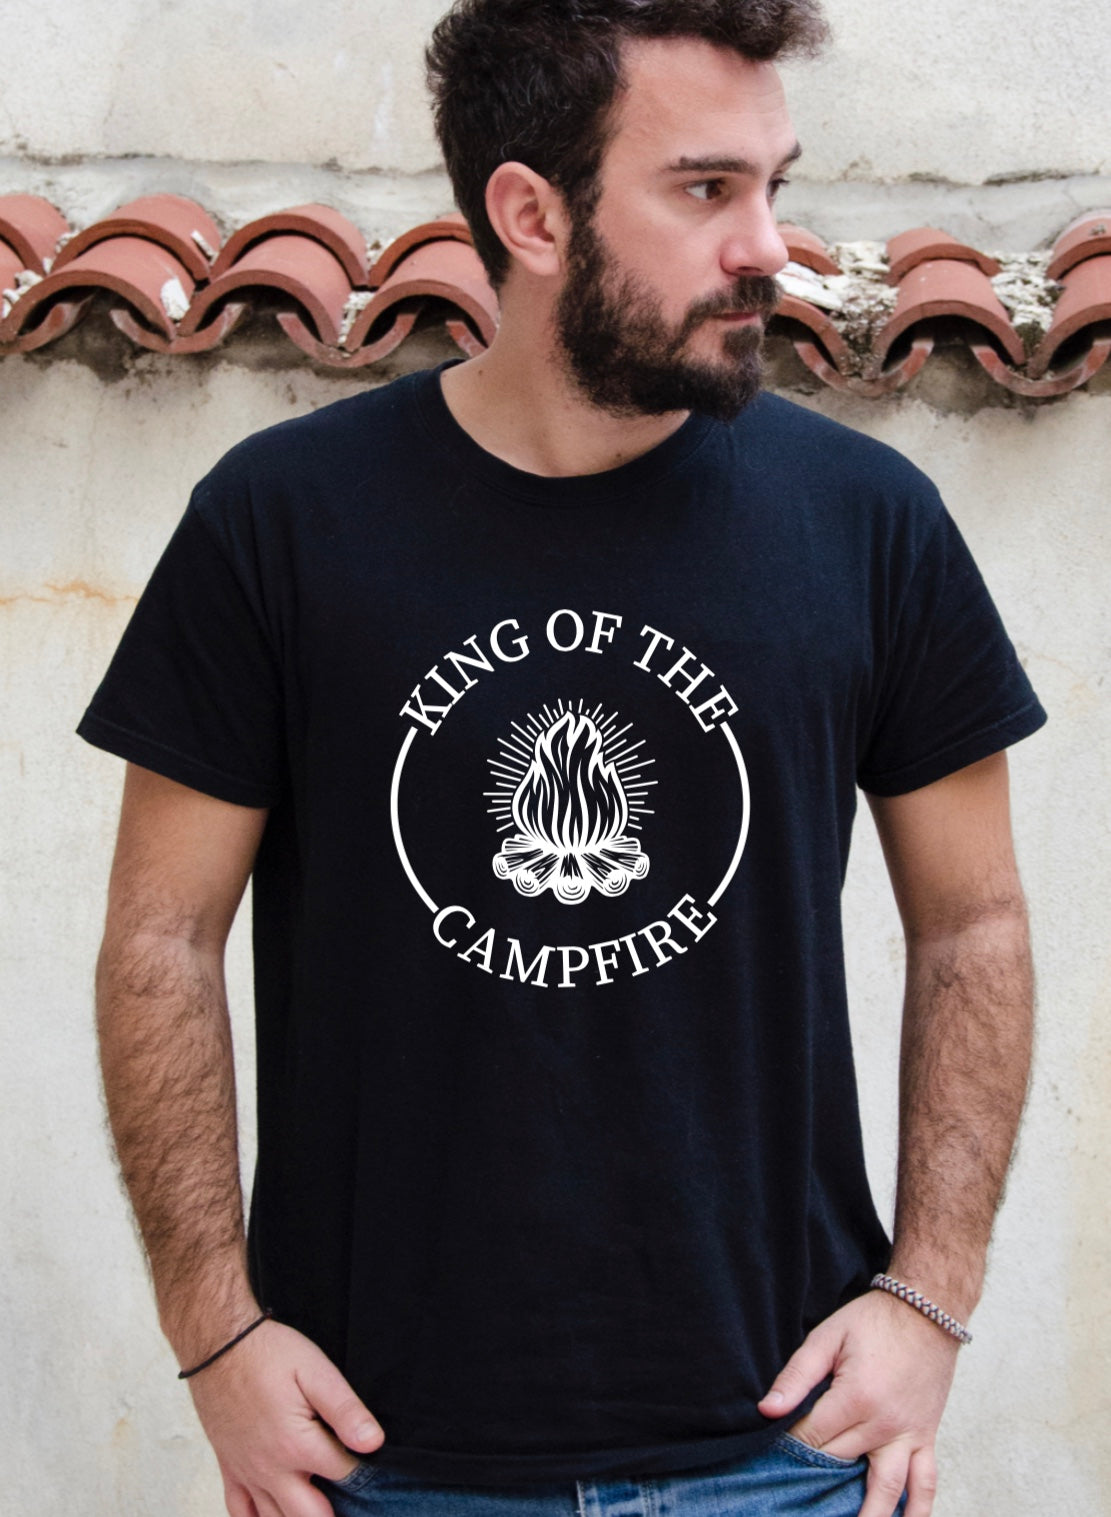 King of the campfire t-shirt 